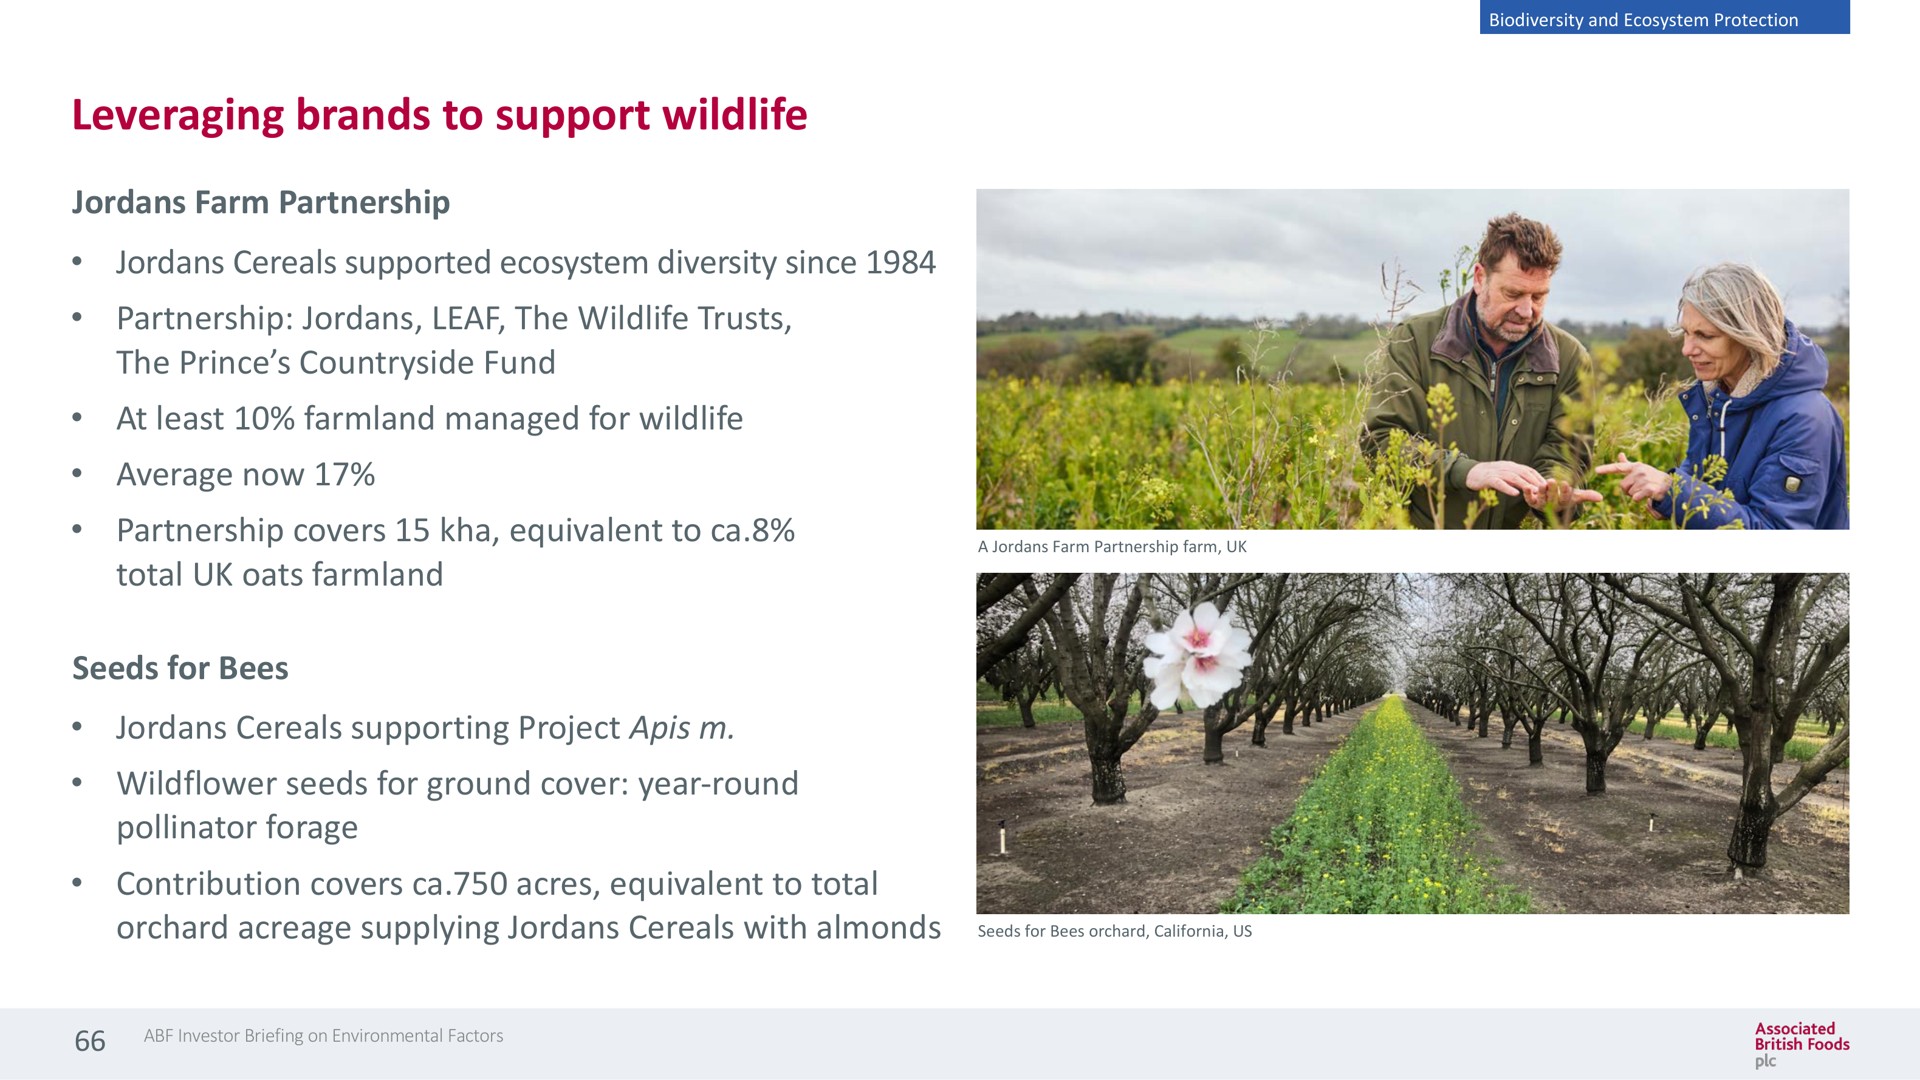 leveraging brands to support wildlife jordans farm partnership jordans cereals supported ecosystem diversity since partnership jordans leaf the wildlife trusts the prince countryside fund at least managed for wildlife average now partnership covers equivalent to total oats seeds for bees jordans cereals supporting project seeds for ground cover year round pollinator forage contribution covers acres equivalent to total orchard acreage supplying jordans cereals with almonds us | Associated British Foods